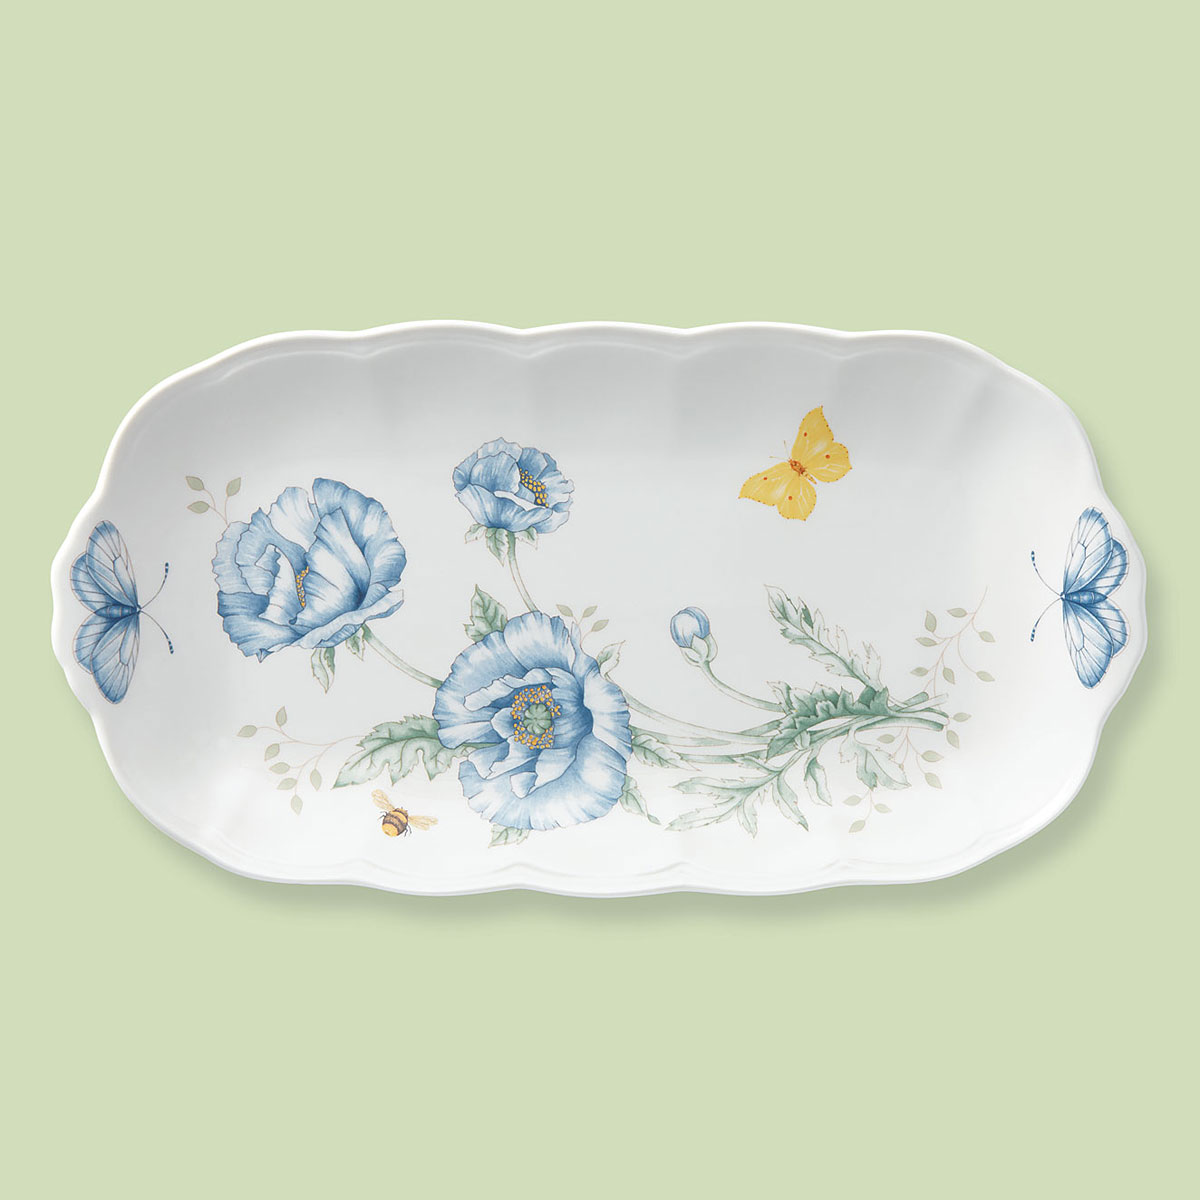 Lenox Butterfly Meadow China Oblong Tray